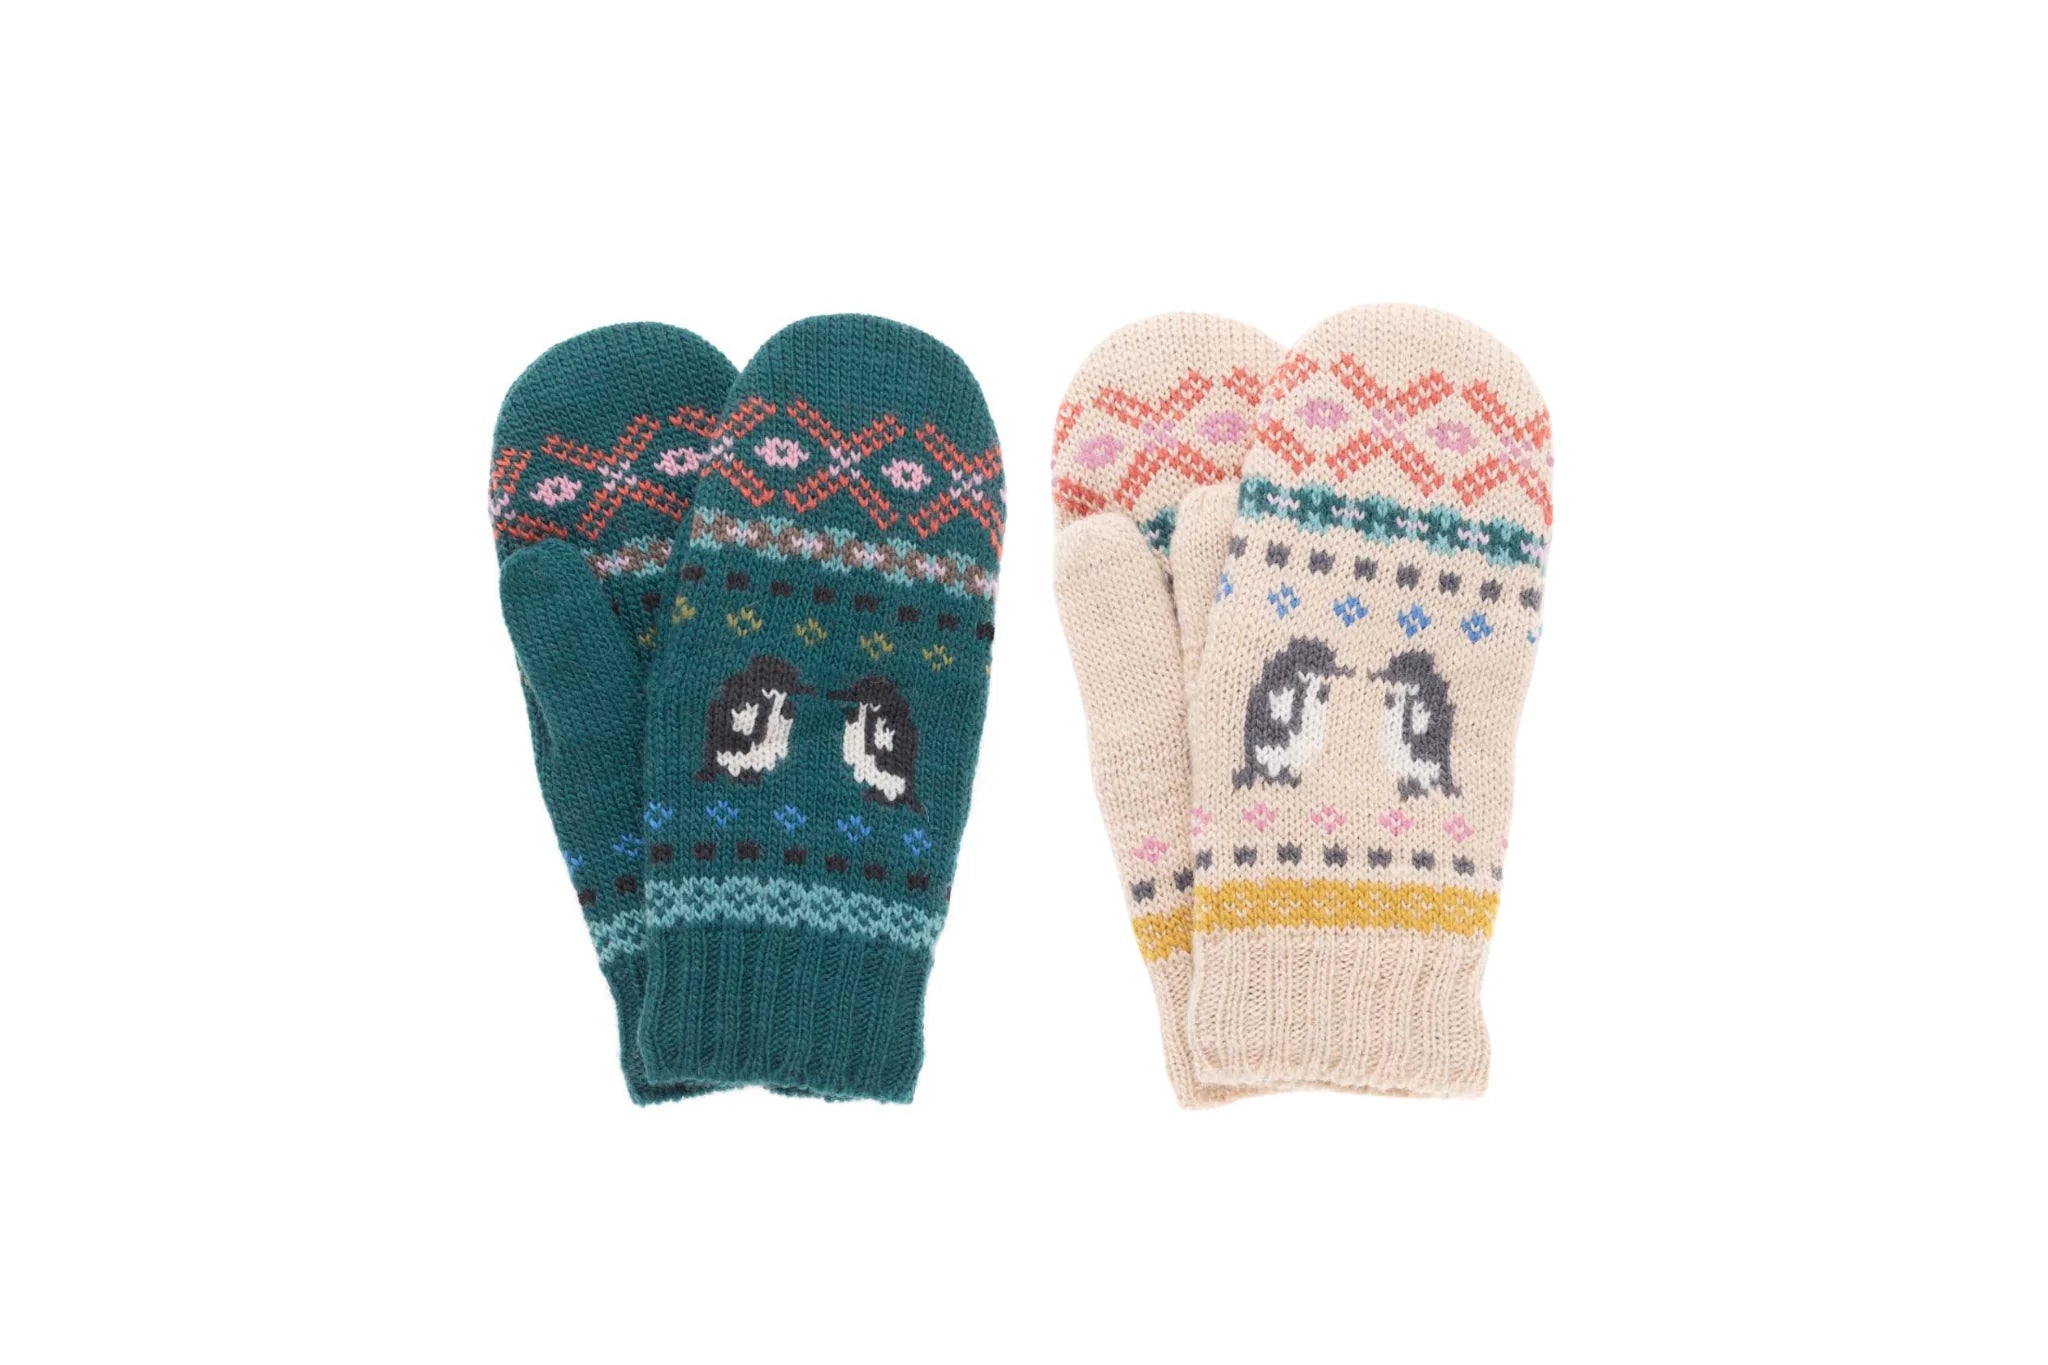 Penguin Party Mittens in Natural